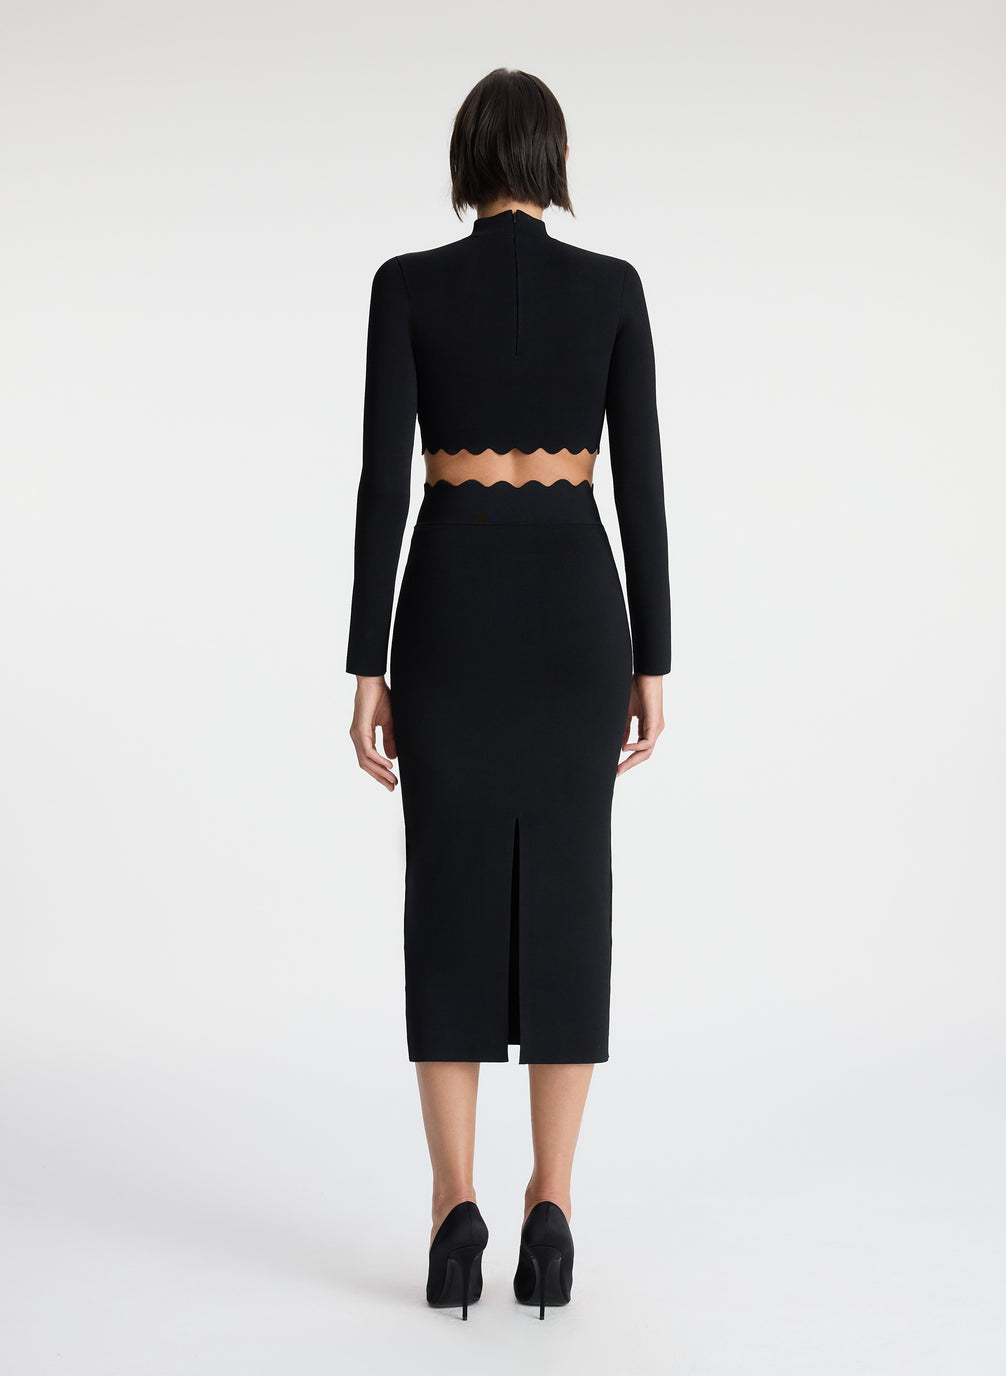 back view of woman wearing black long sleeve crop top with scallop detailing and matching black scalloped detailing knit midi skirt